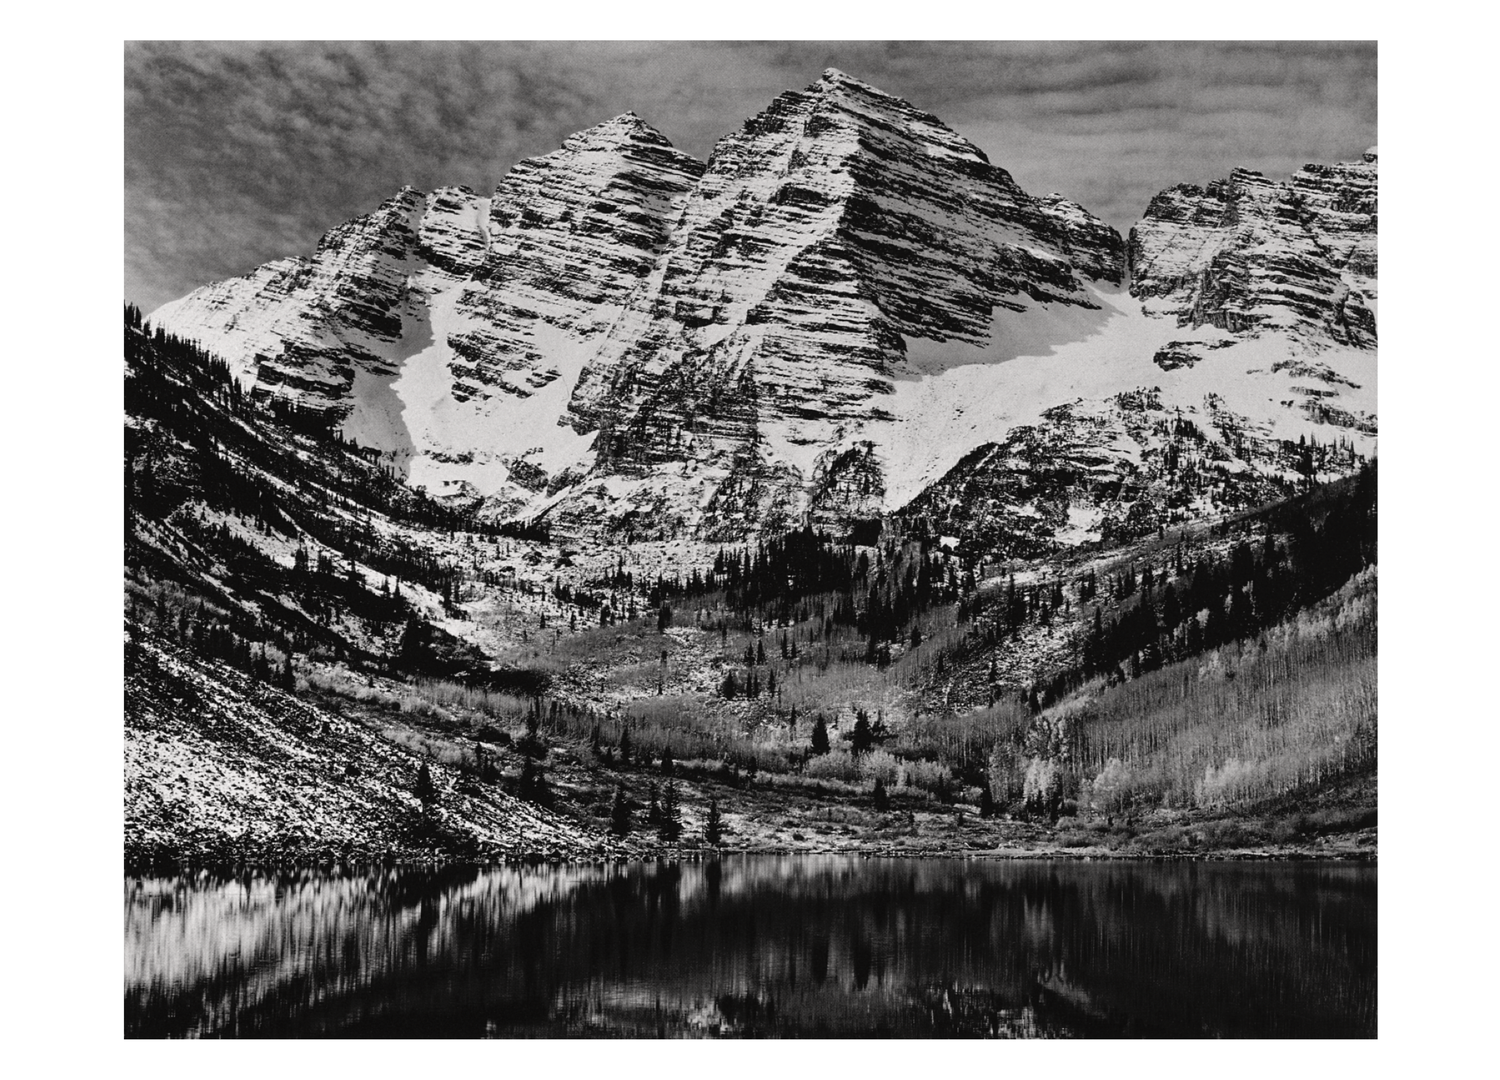 MAROON BELLS - ANSEL ADAMS LARGE MATTED REPRODUCTION